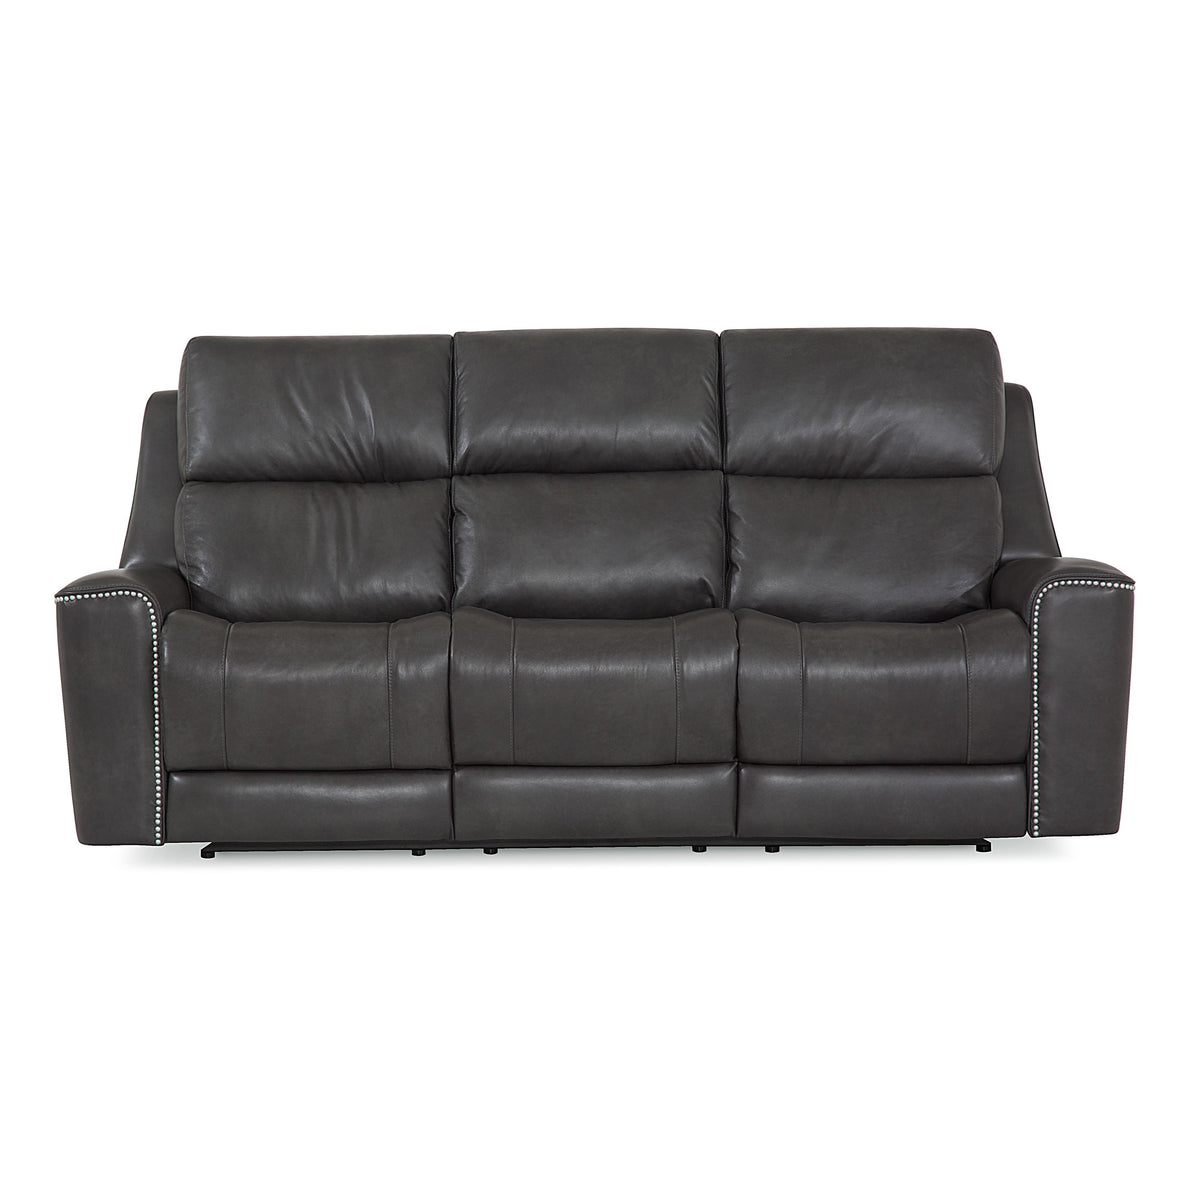 Hastings Power Reclining Leather Sofa IMAGE 1